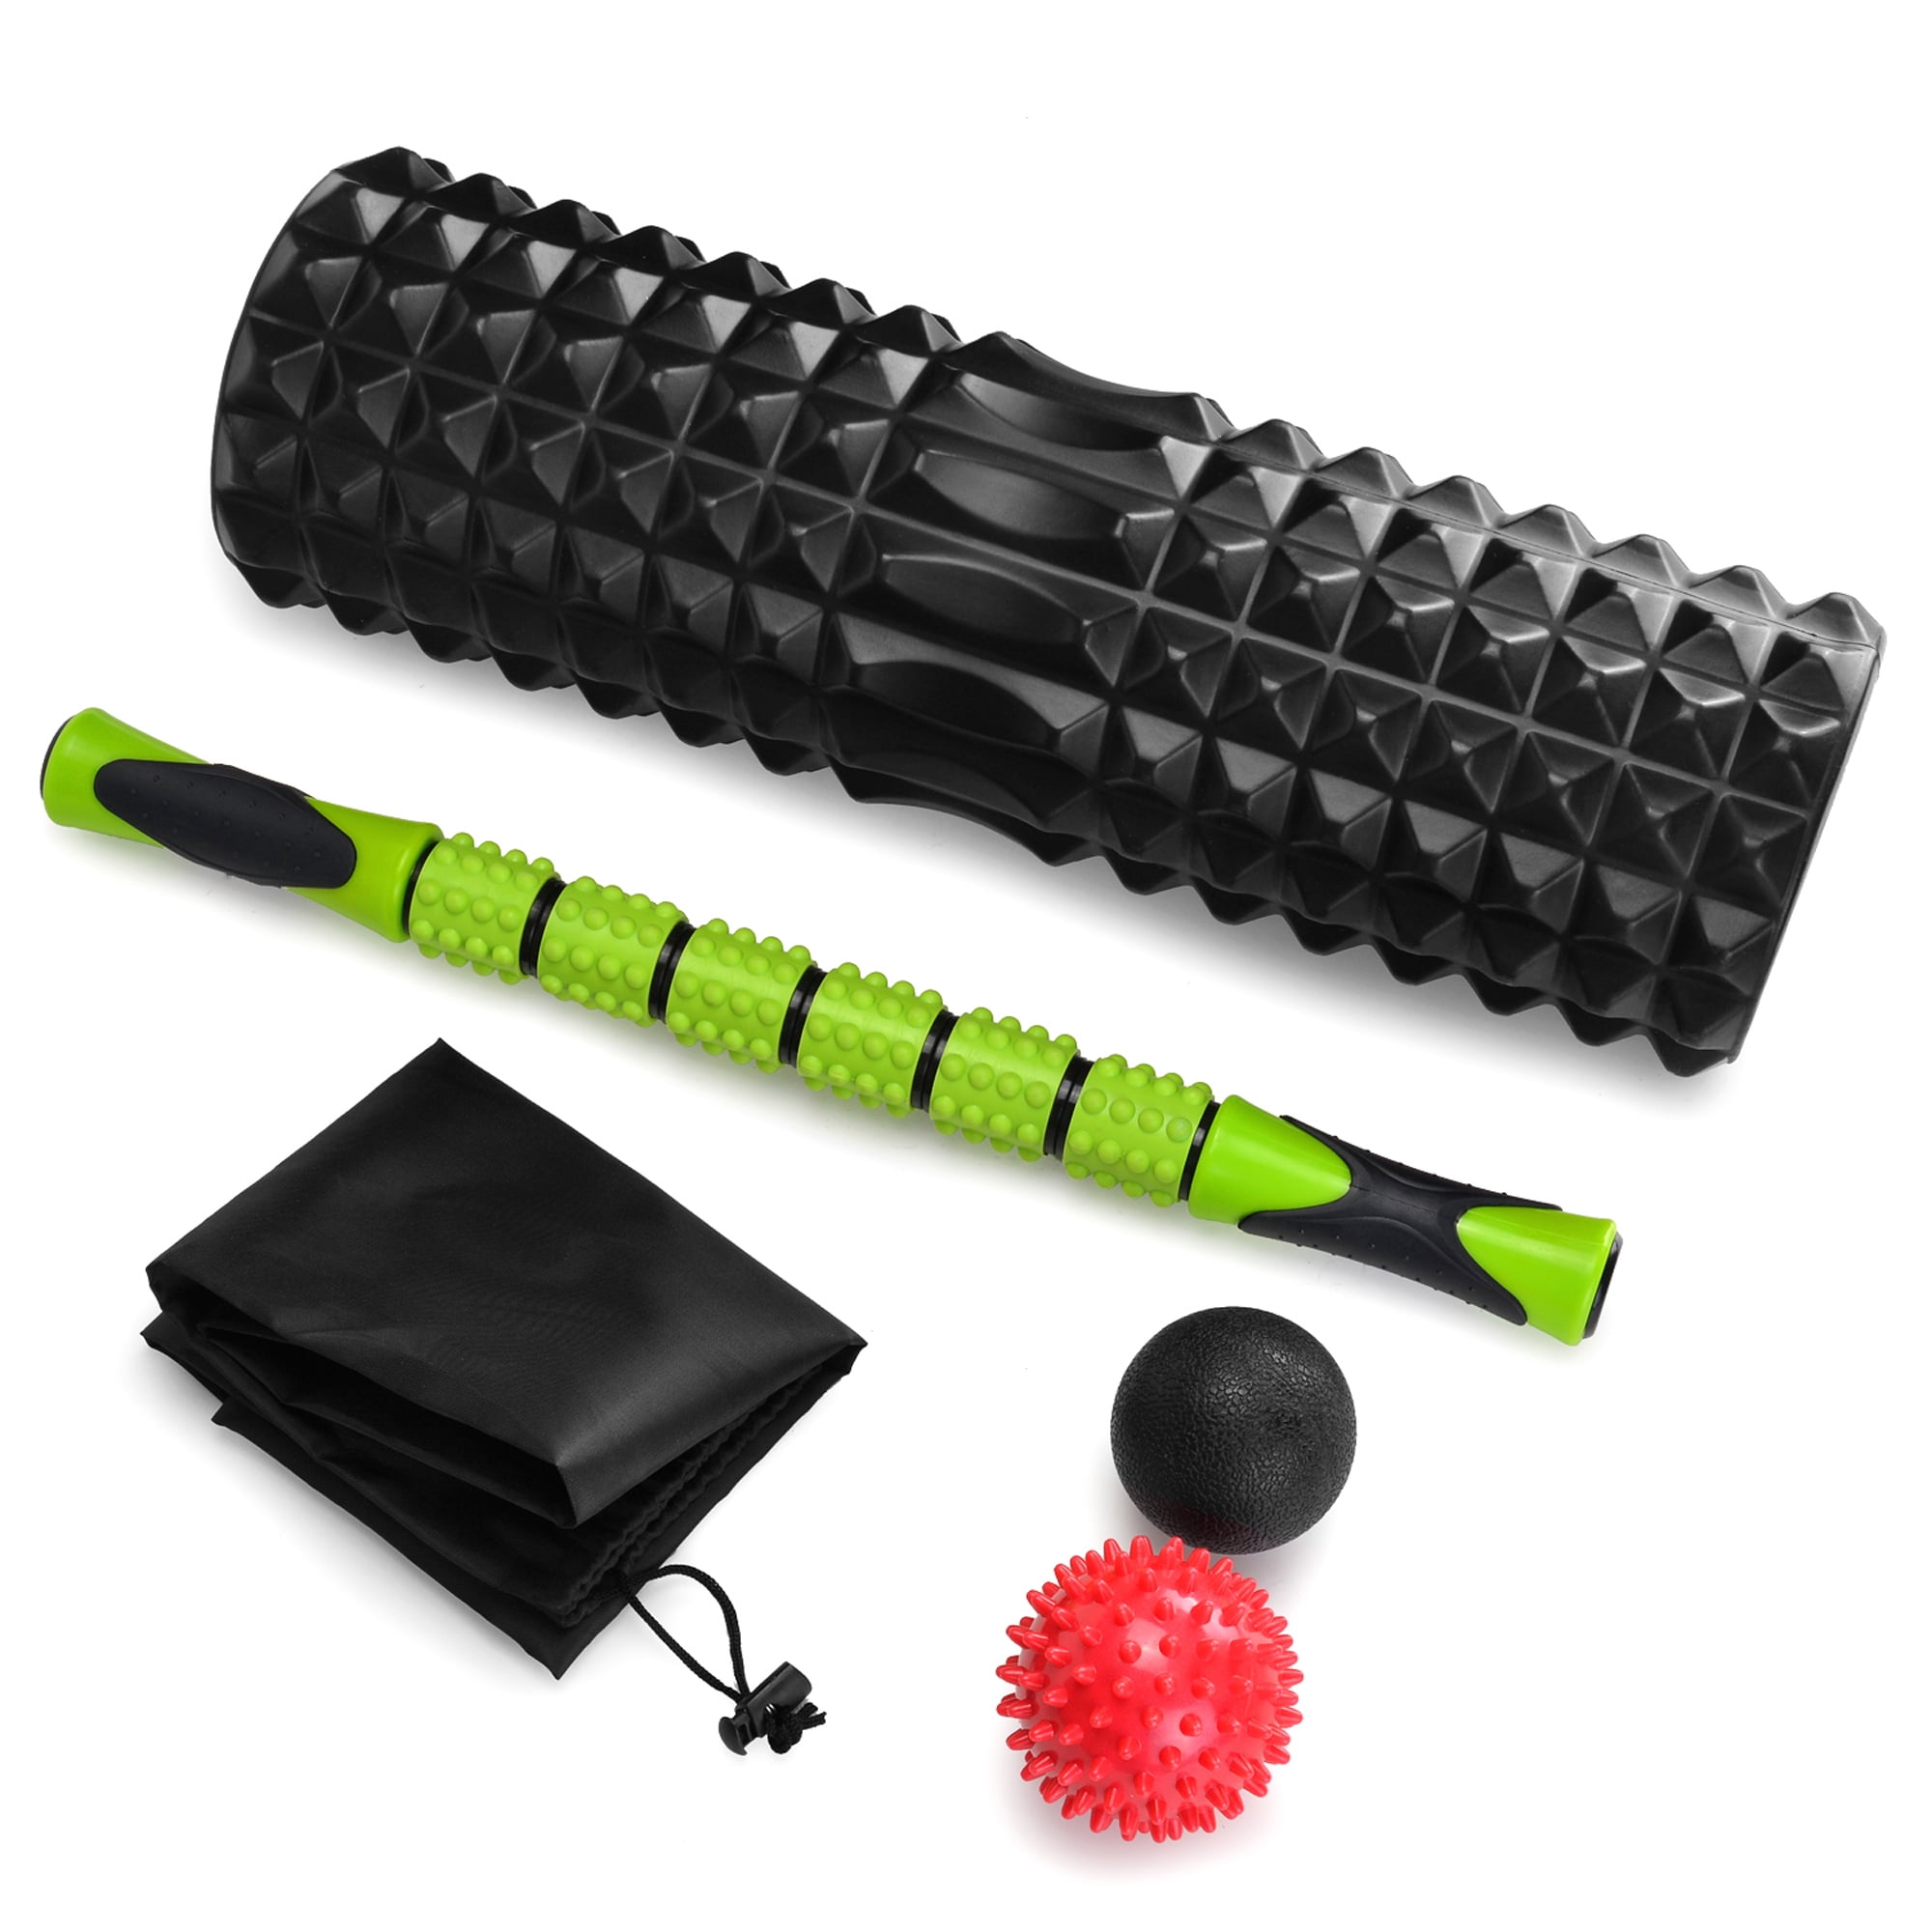 5 In 1 Large Size Foam Roller Kit With Muscle Roller Stick And Massage Balls High Density 18